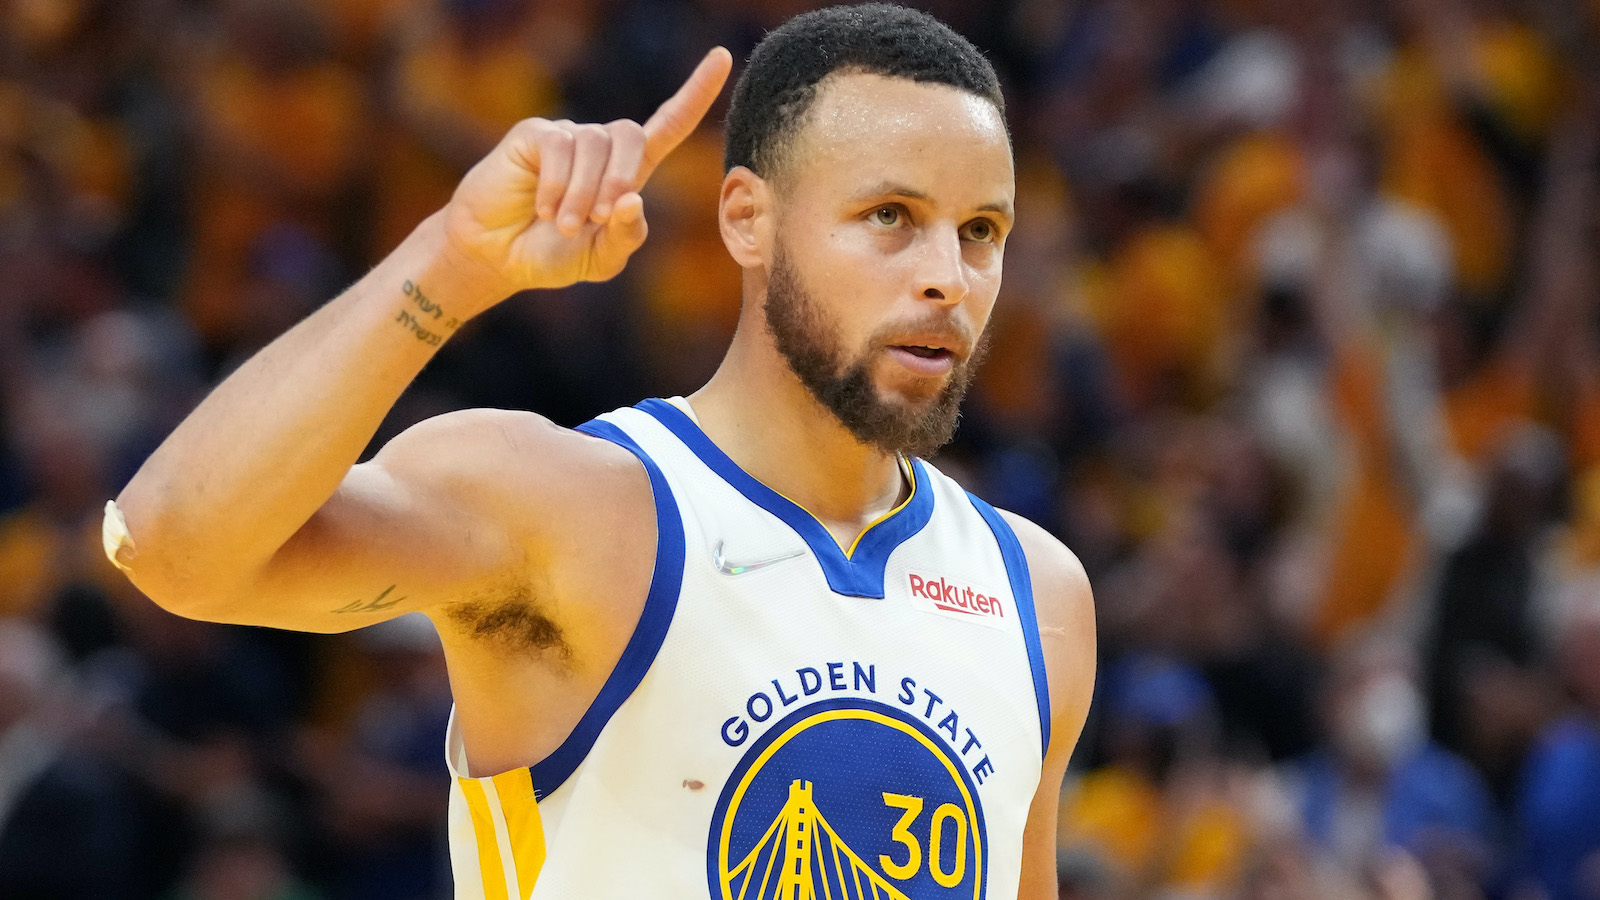 Golden State Warriors at a Crossroads: Steph Curry's Call for Change and Potential Trades